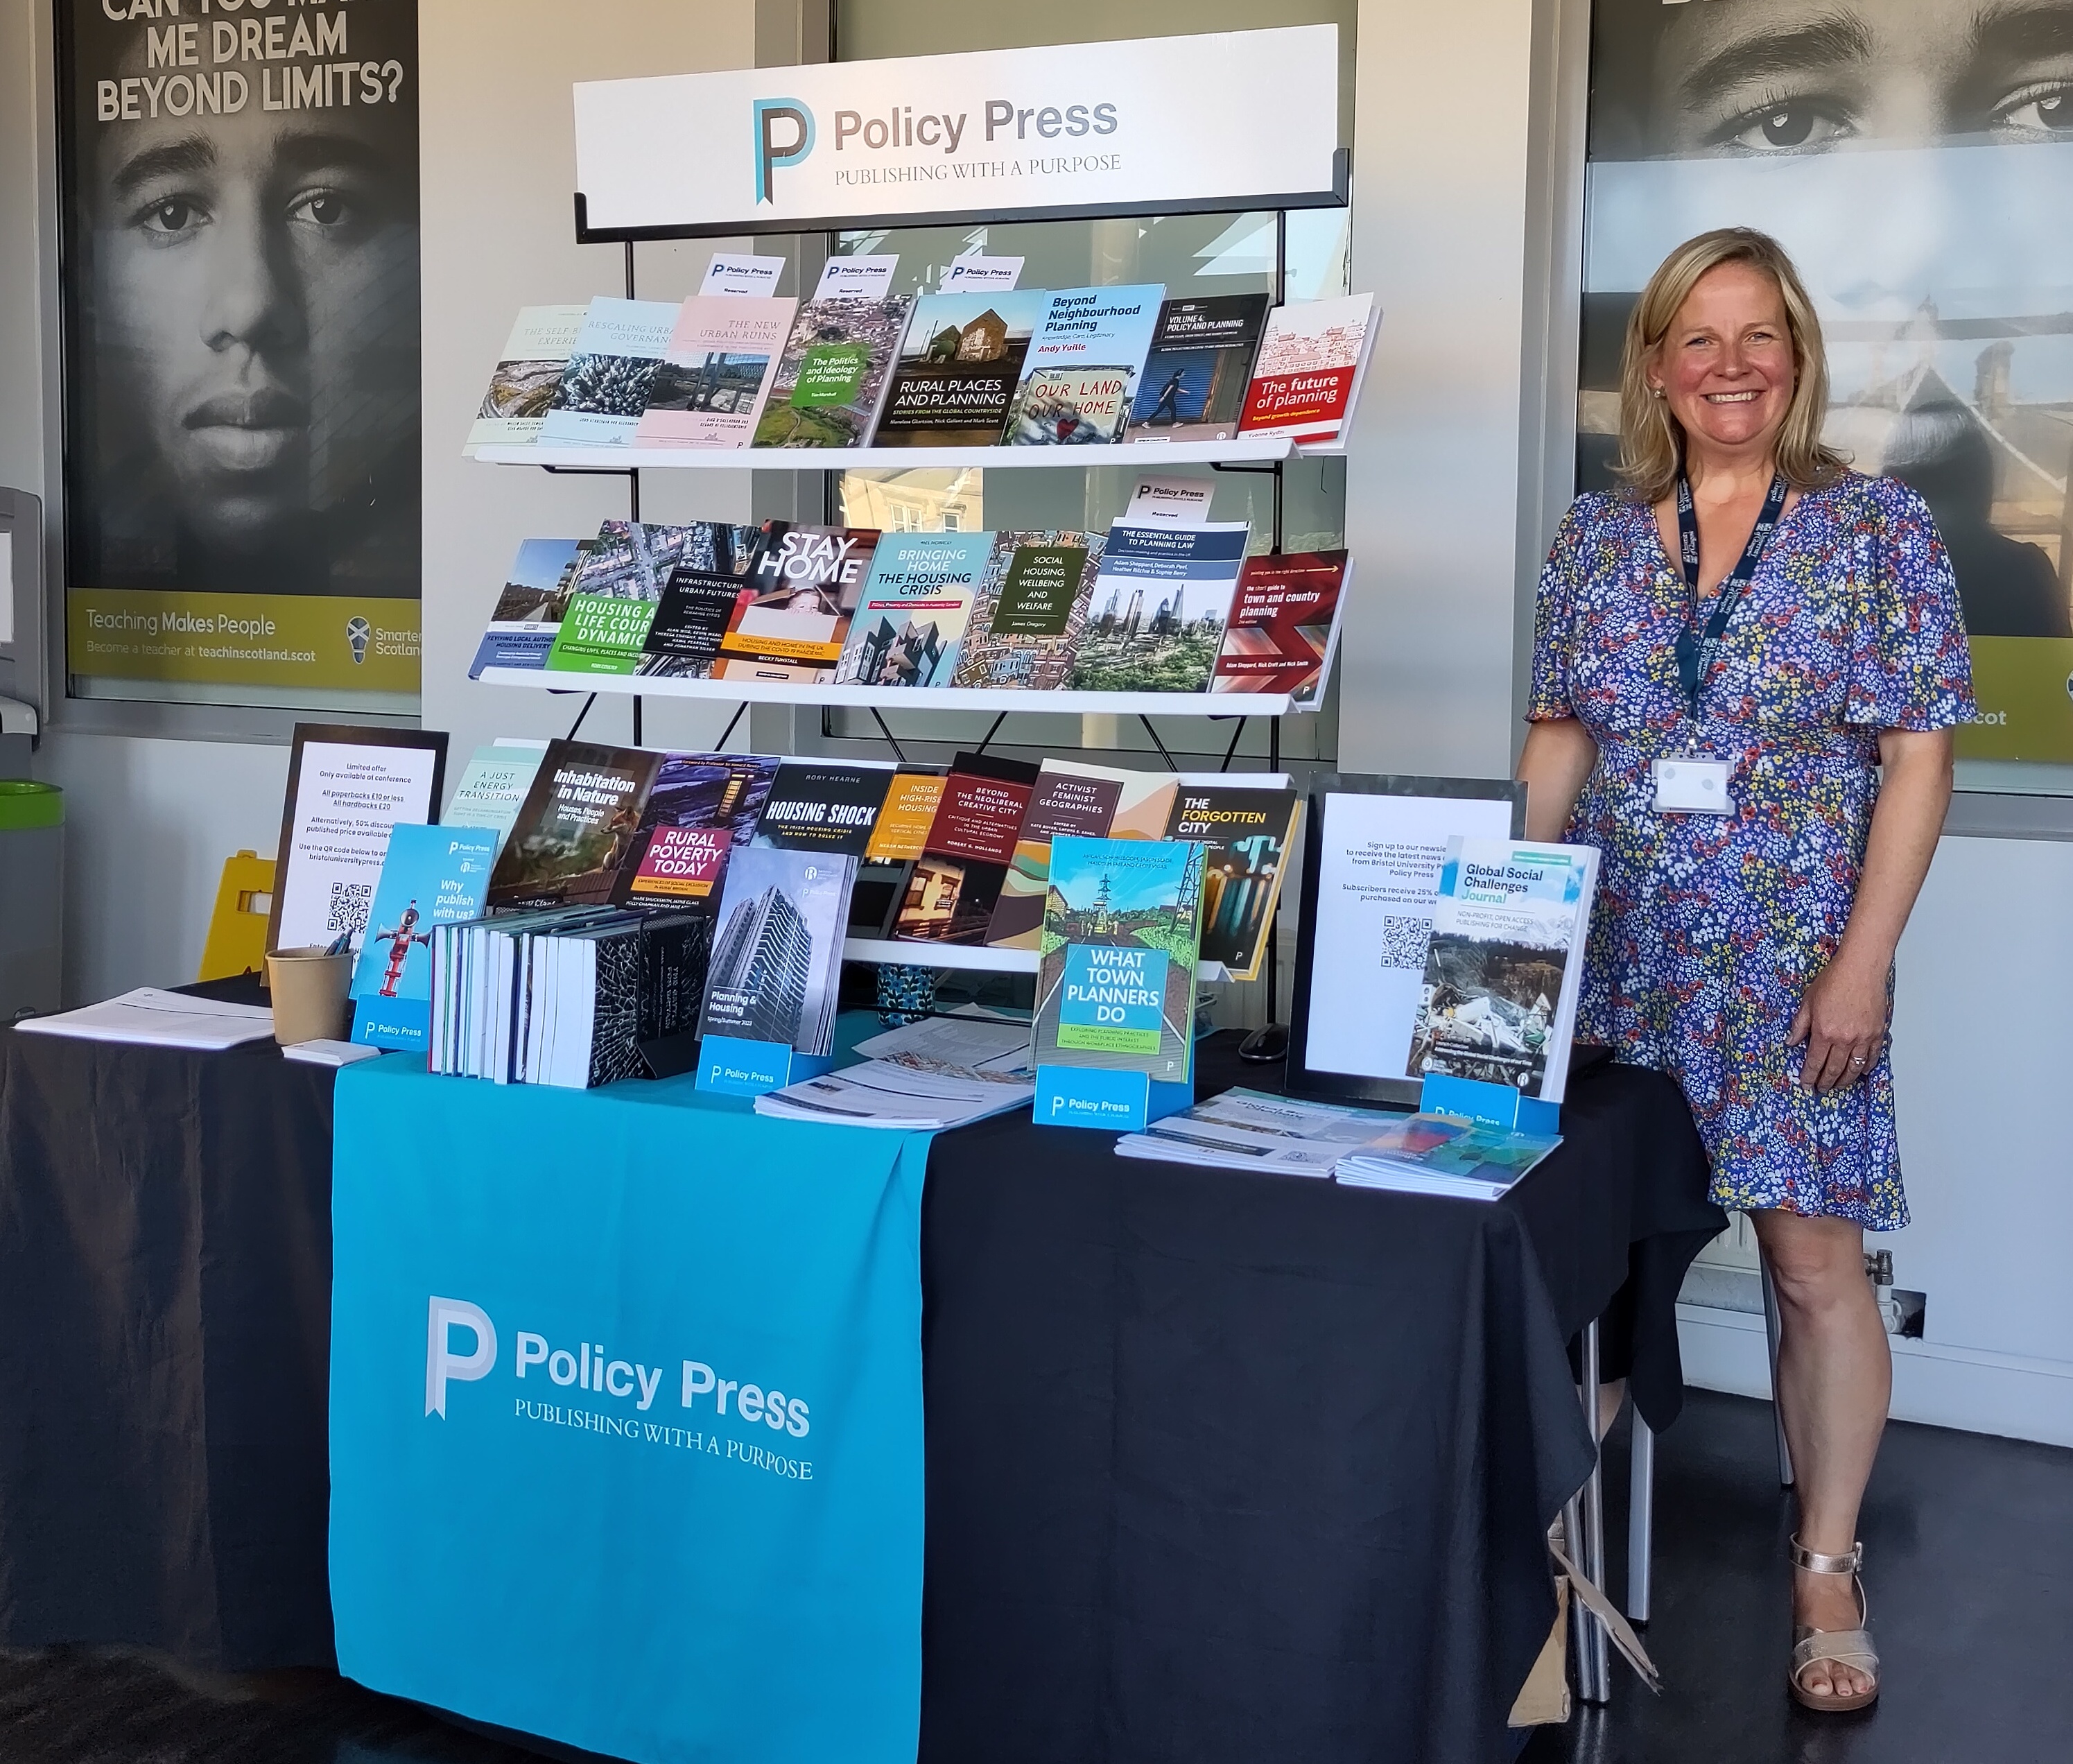 A smiling woman standing by a stall with books on display and a banner saying 'Policy Press. Publishing with a purpose'